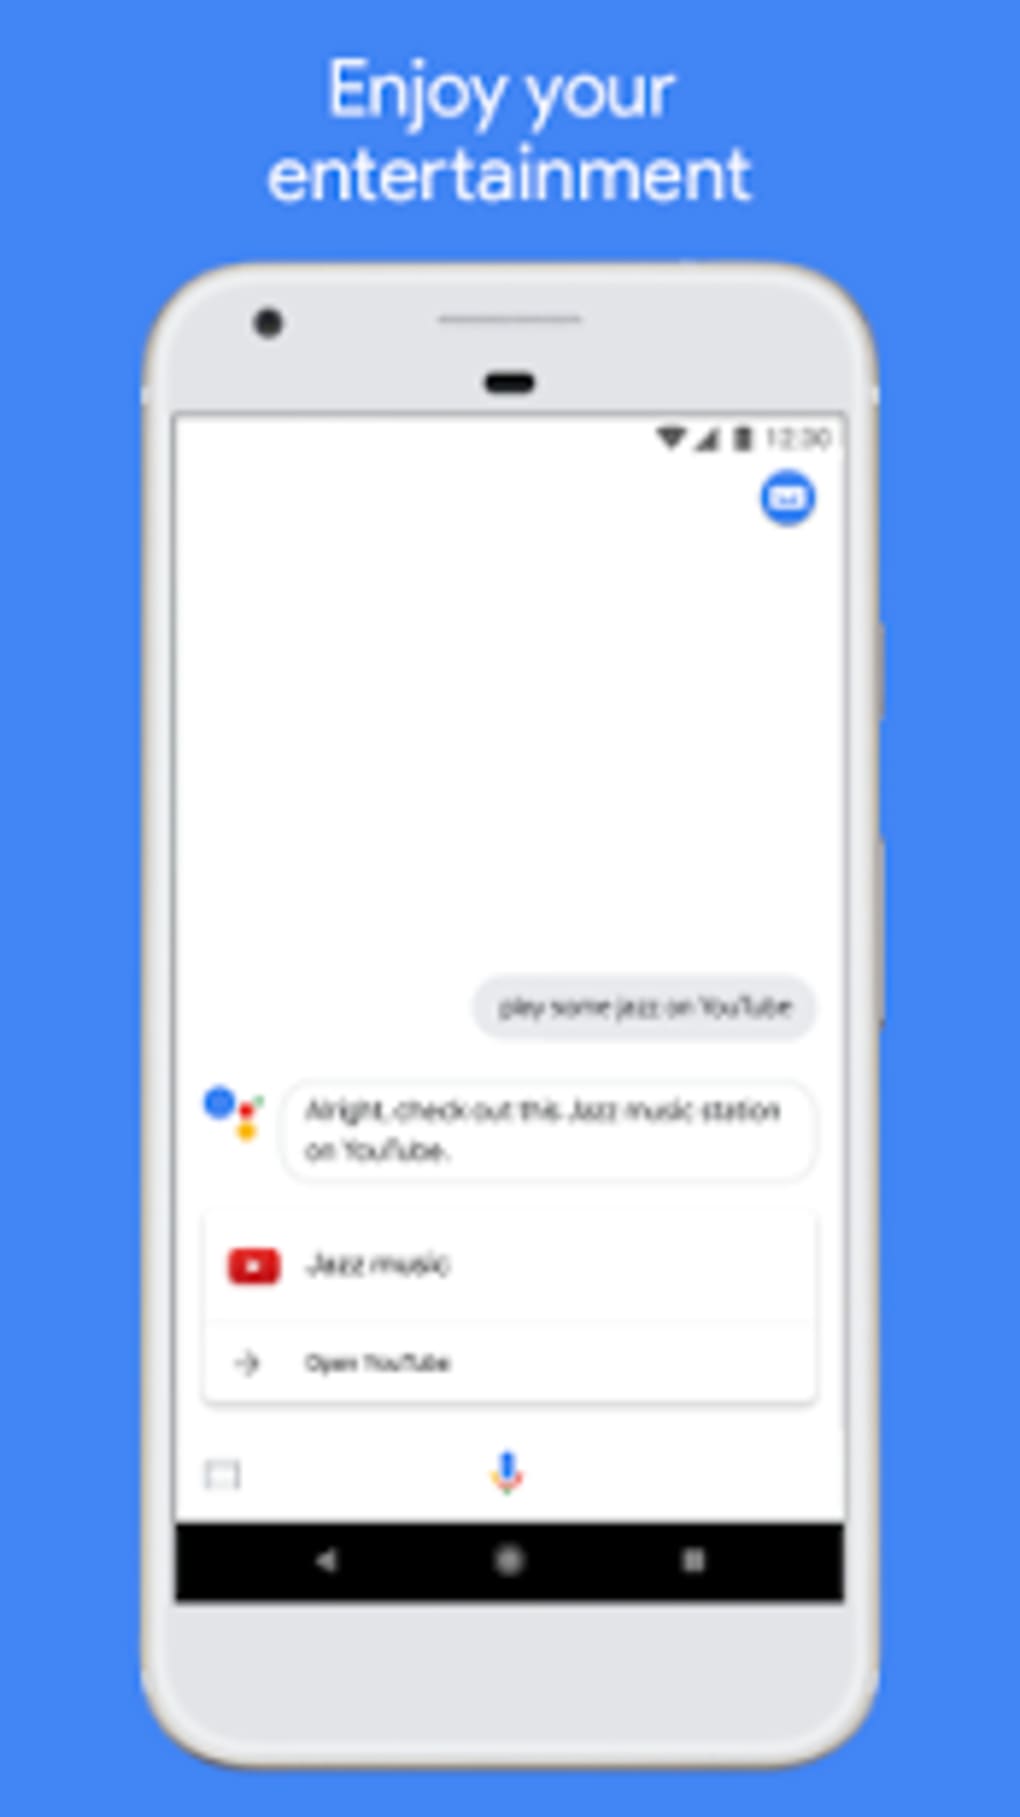 google voice assistant play album downloaded on phone